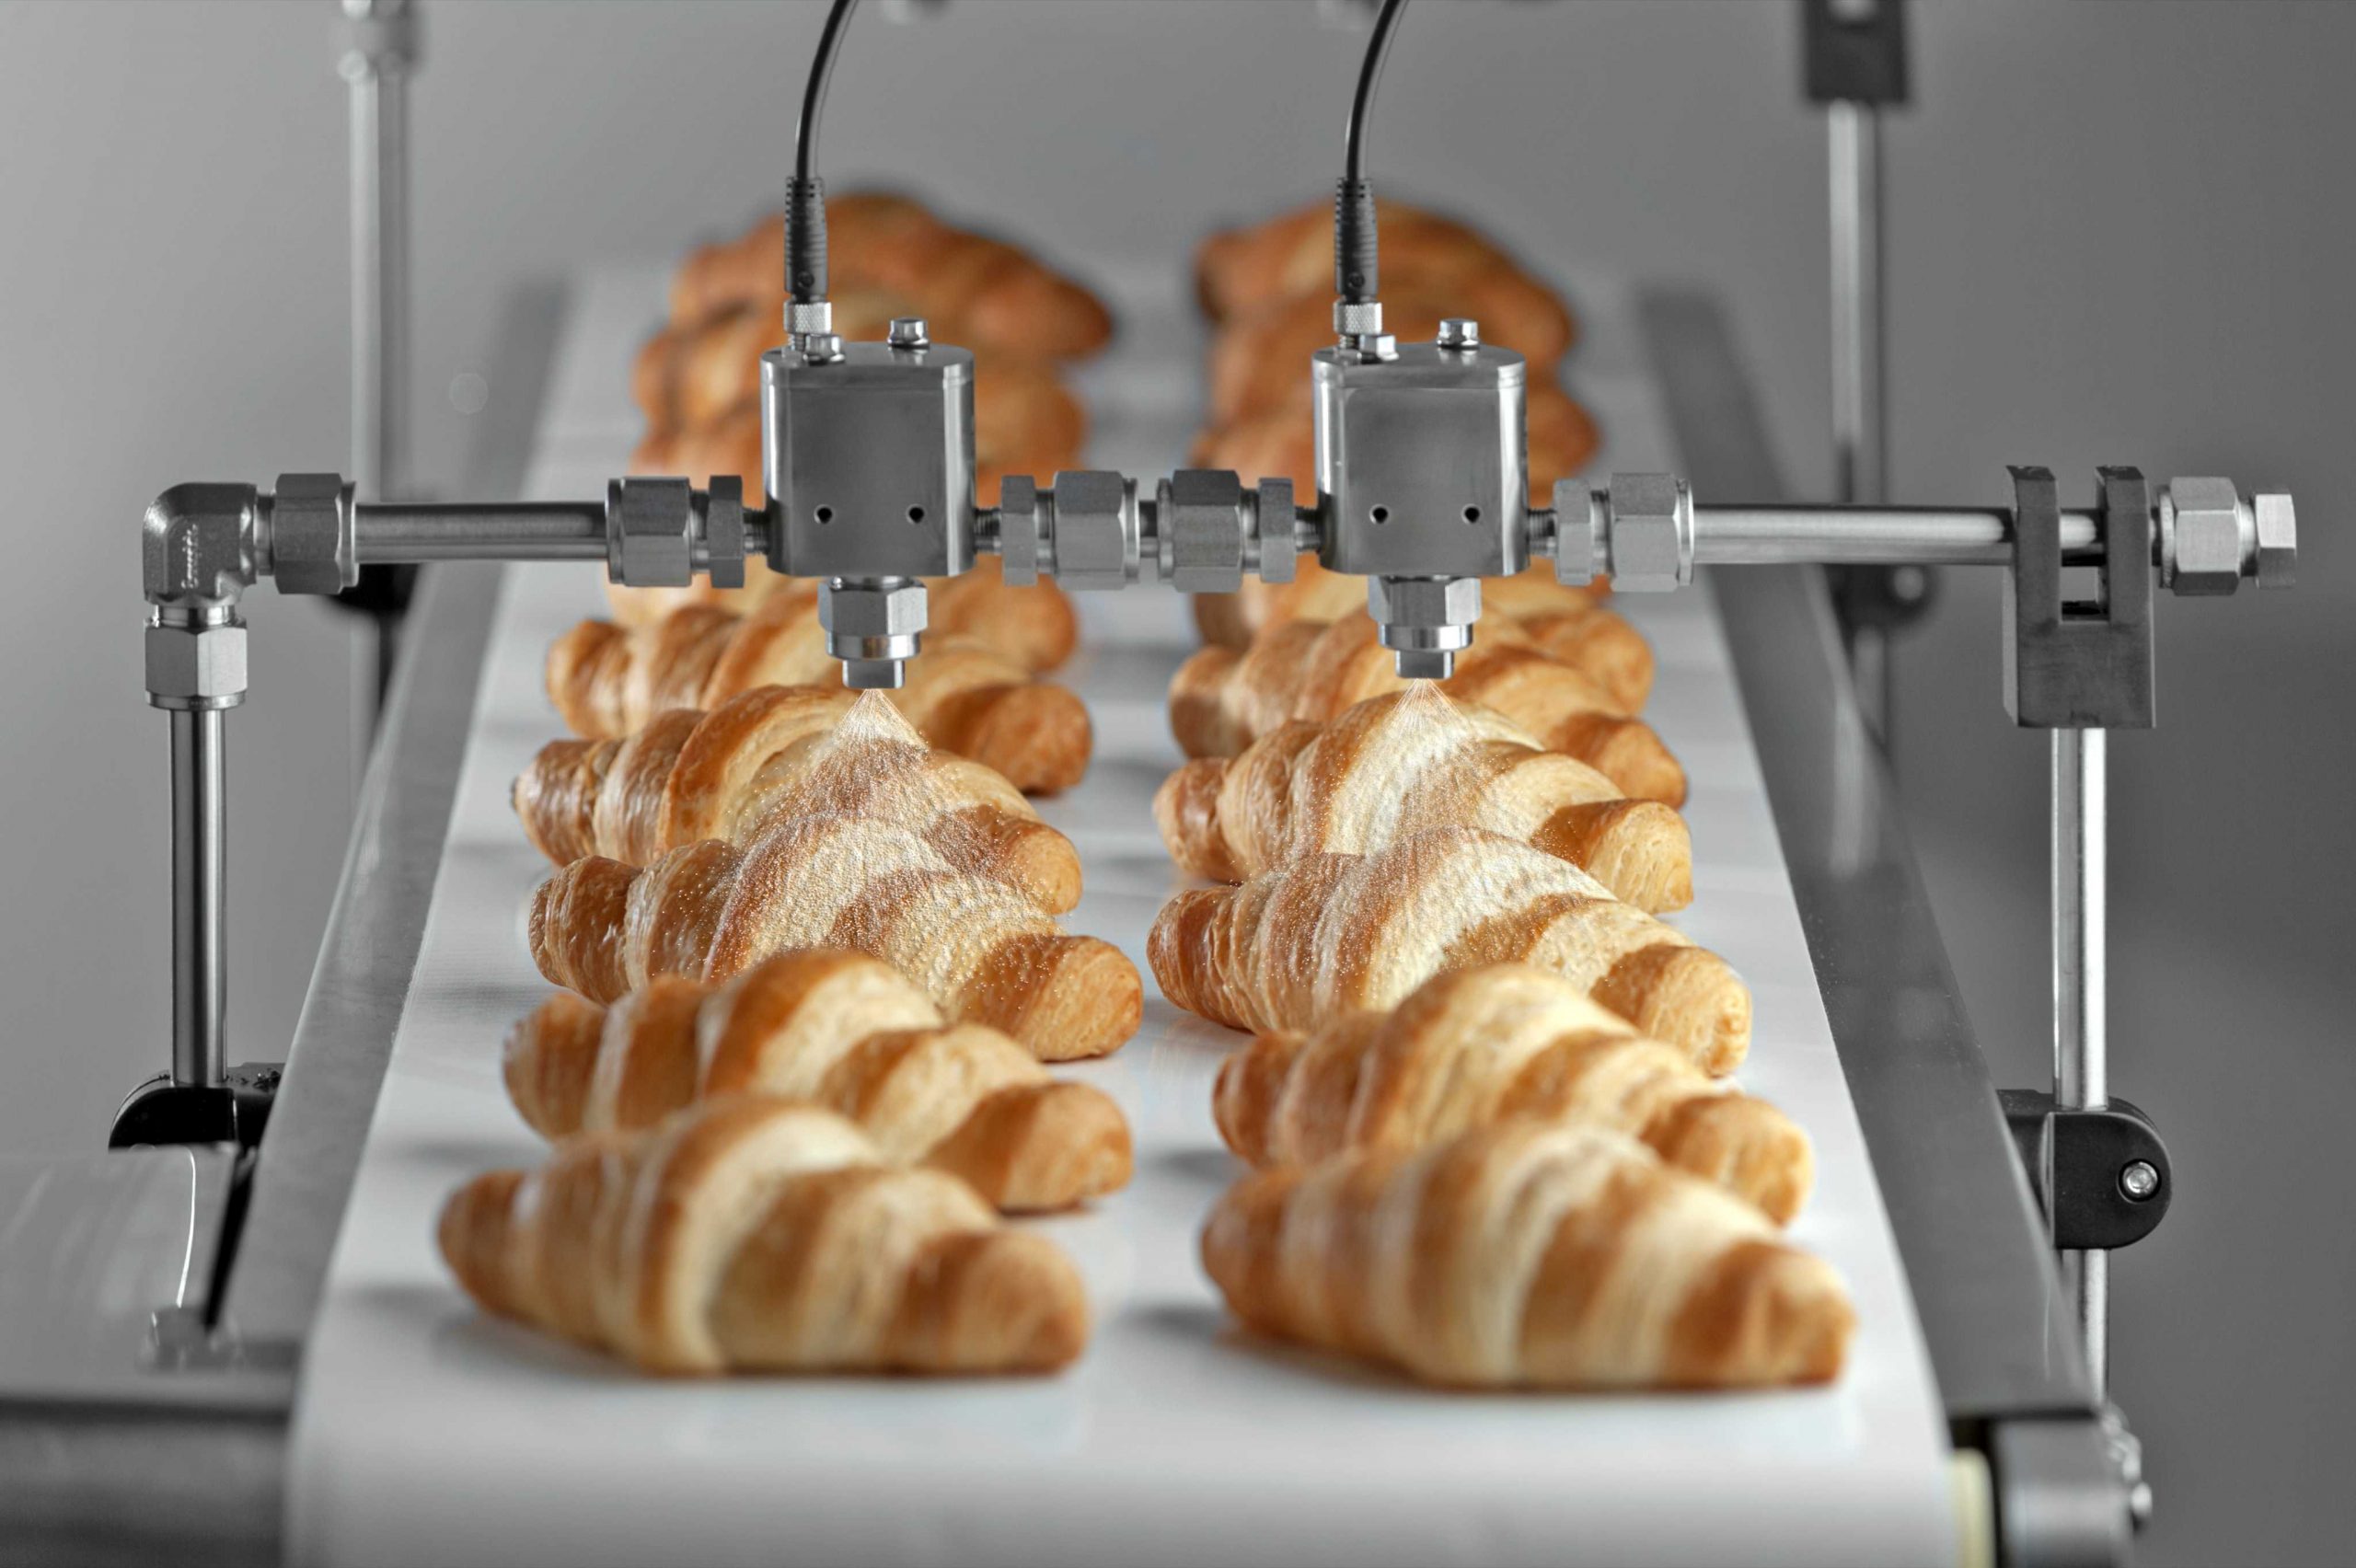 BETE FlexFlow Precision Spray Control System with Electric HydroPulse Automatic Spray Nozzles Spraying Croissants on a Bakery Conveyor Coating Application